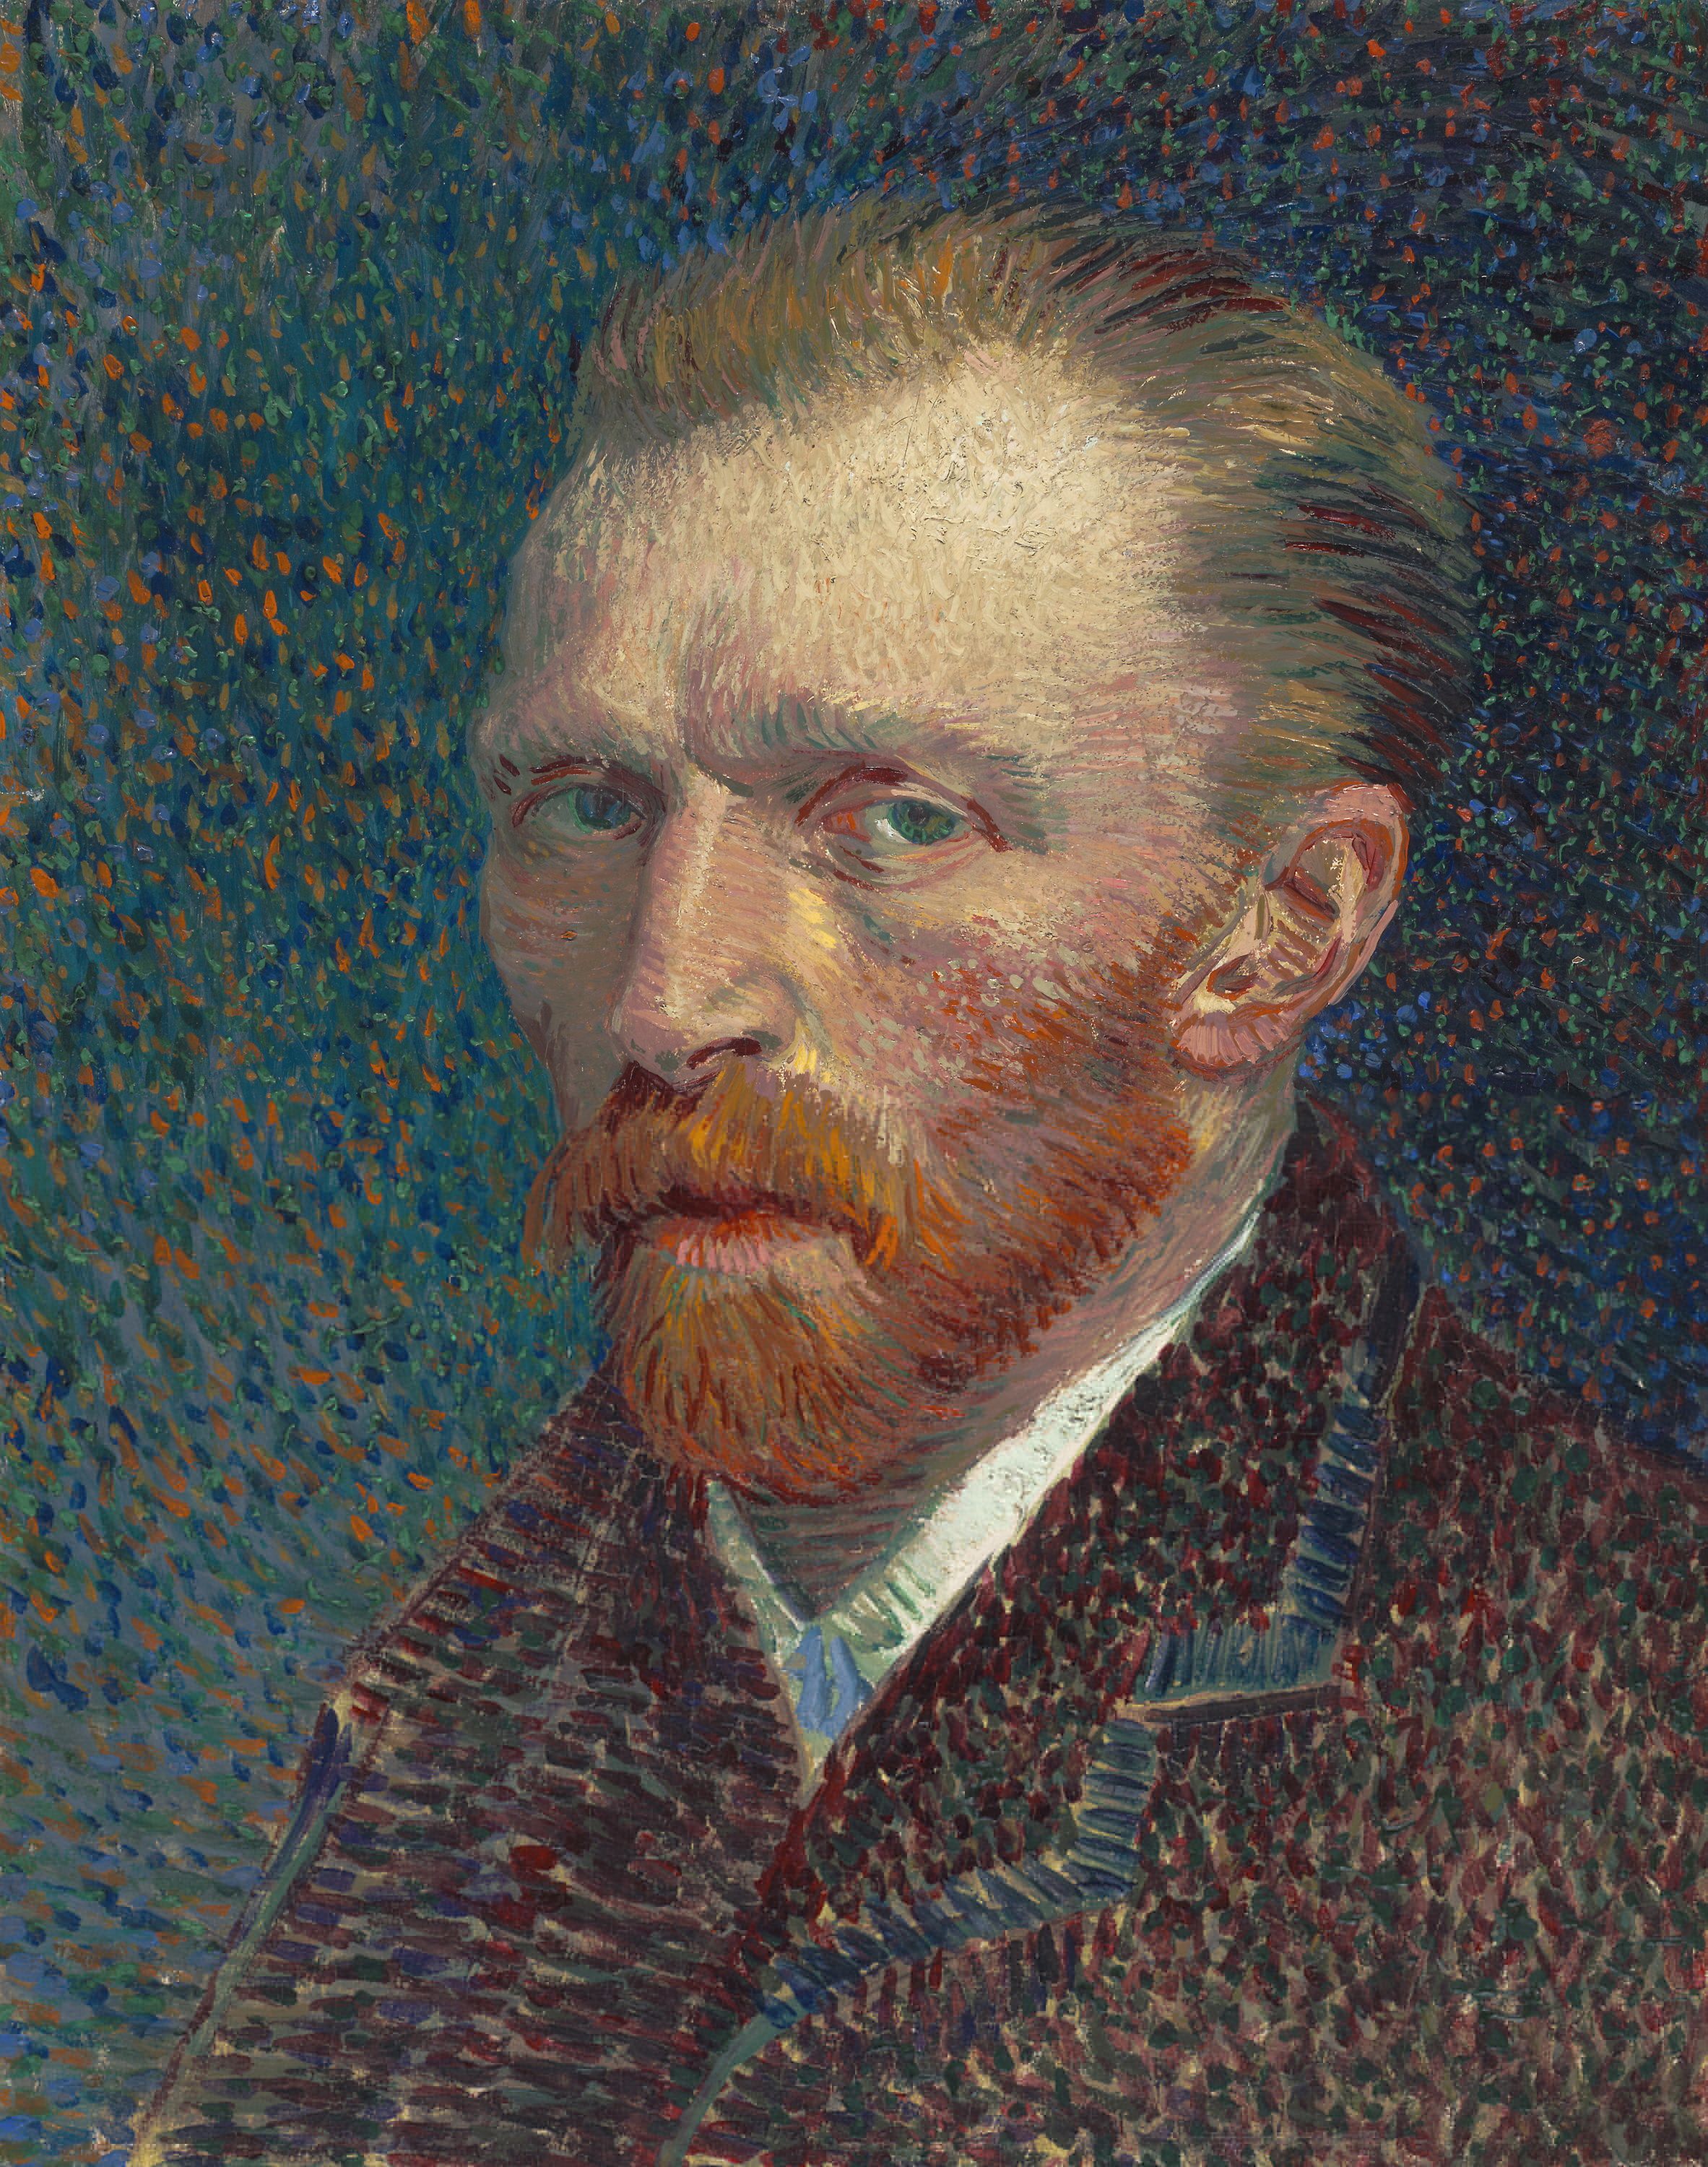 Self-portrait from 1887 painted by Vincent van Gogh (1853-1890) obtained on June 30, 2021. Courtesy of The Courtauld/Handout via REUTERS THIS IMAGE HAS BEEN SUPPLIED BY A THIRD PARTY. NO NEW USES AFTER JULY 30, 2021.